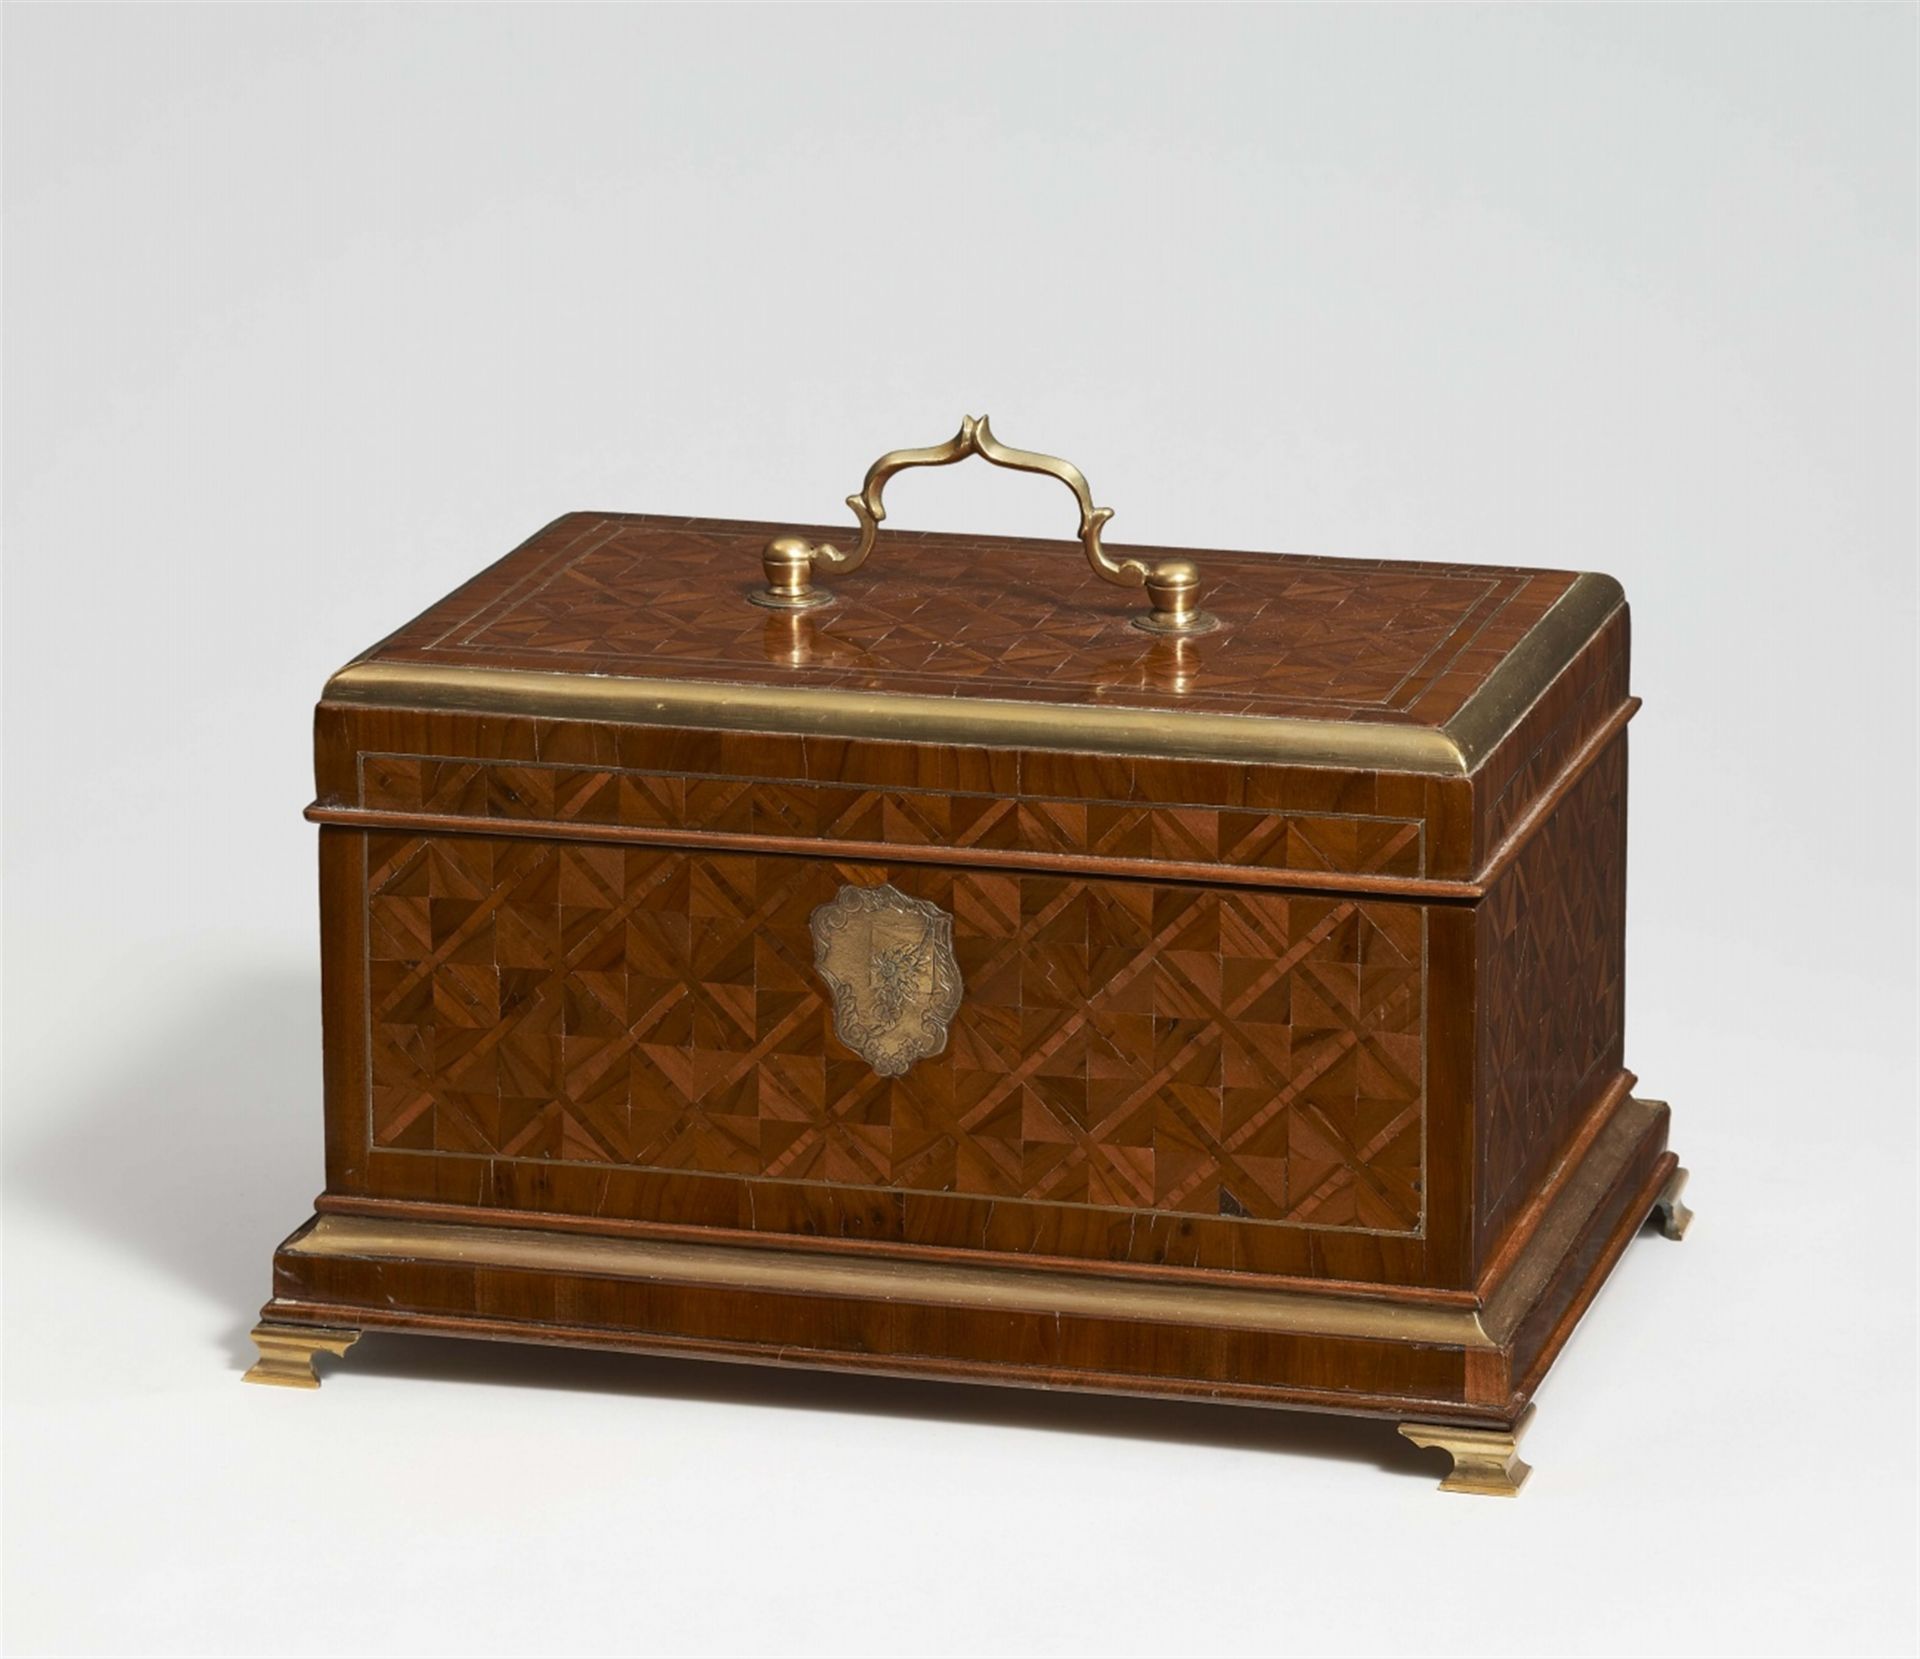 A large cherry wood box by Abraham Roentgen